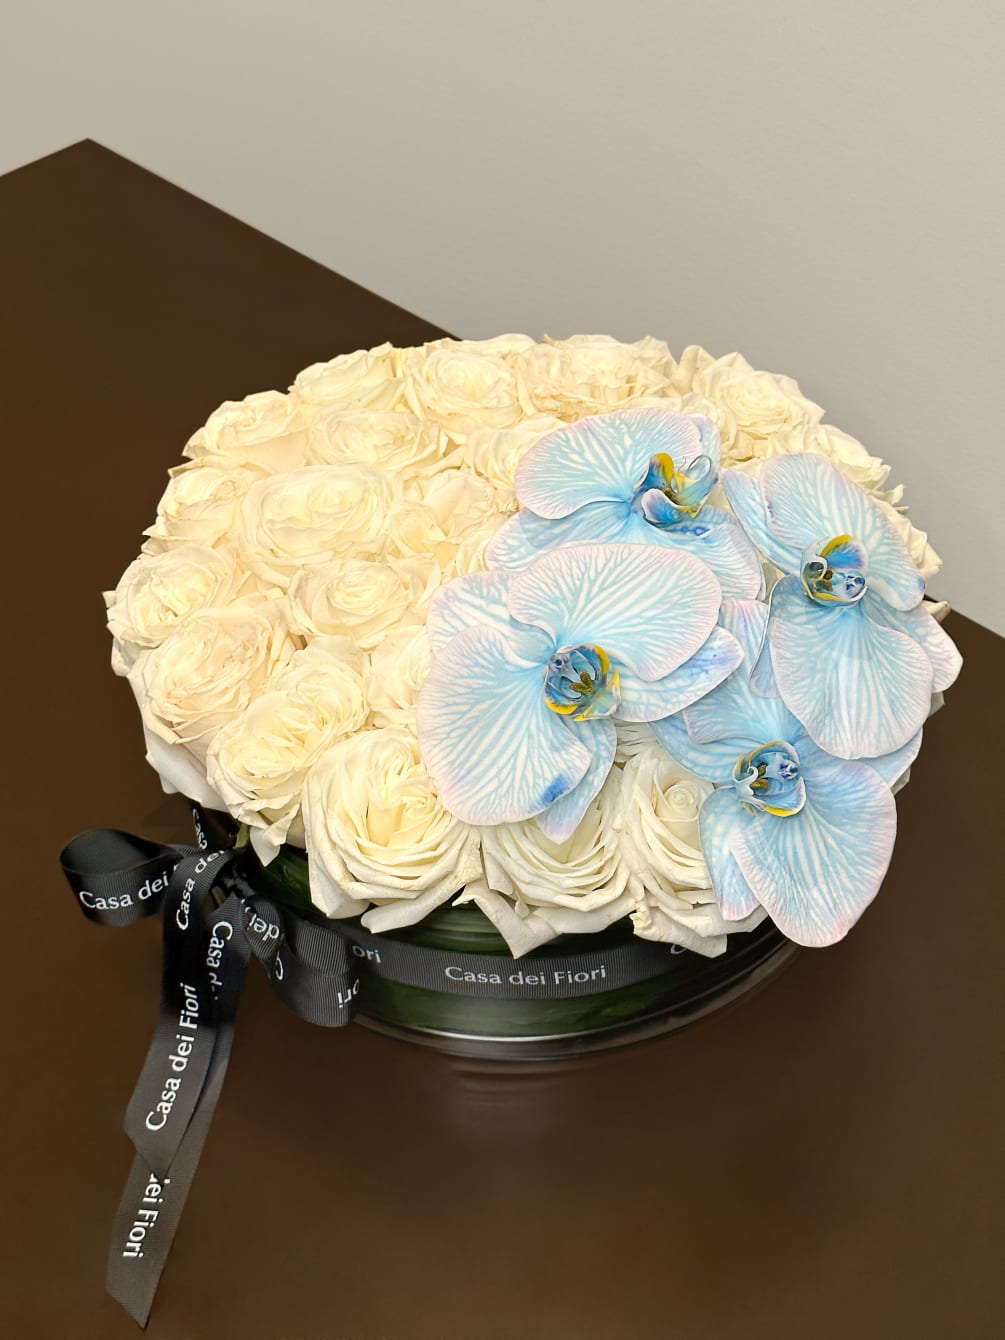 Tender white roses with cymbidium orchids arranged in a vase.
